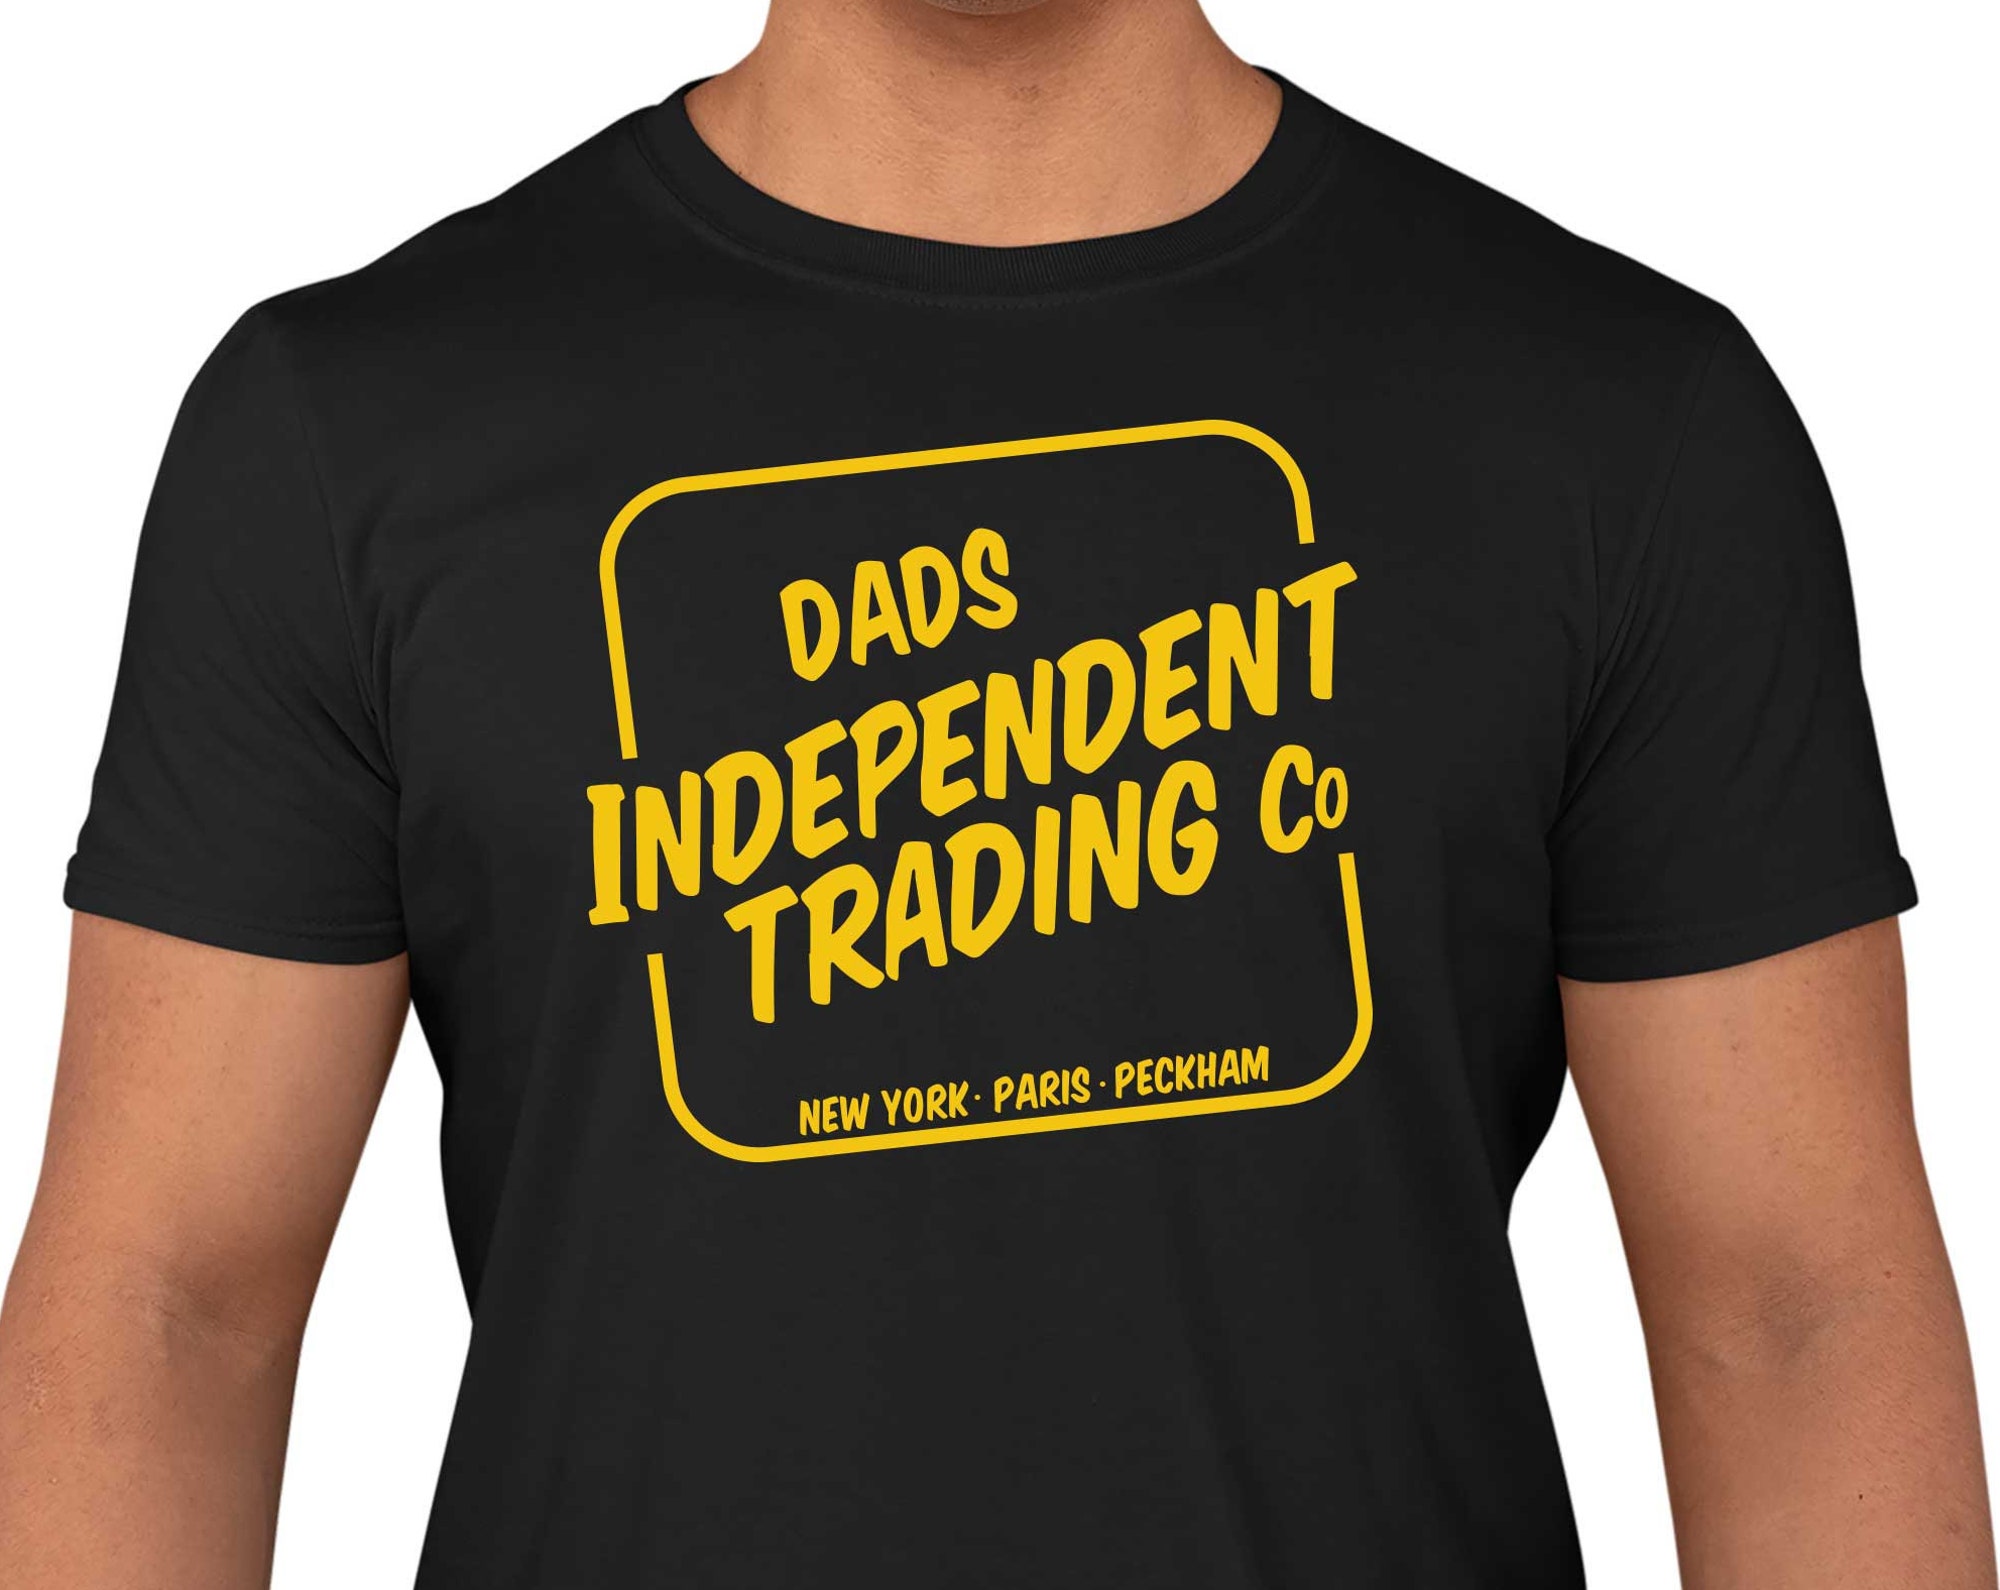 Discover Dads Independent Trading Co Men's T-Shirt